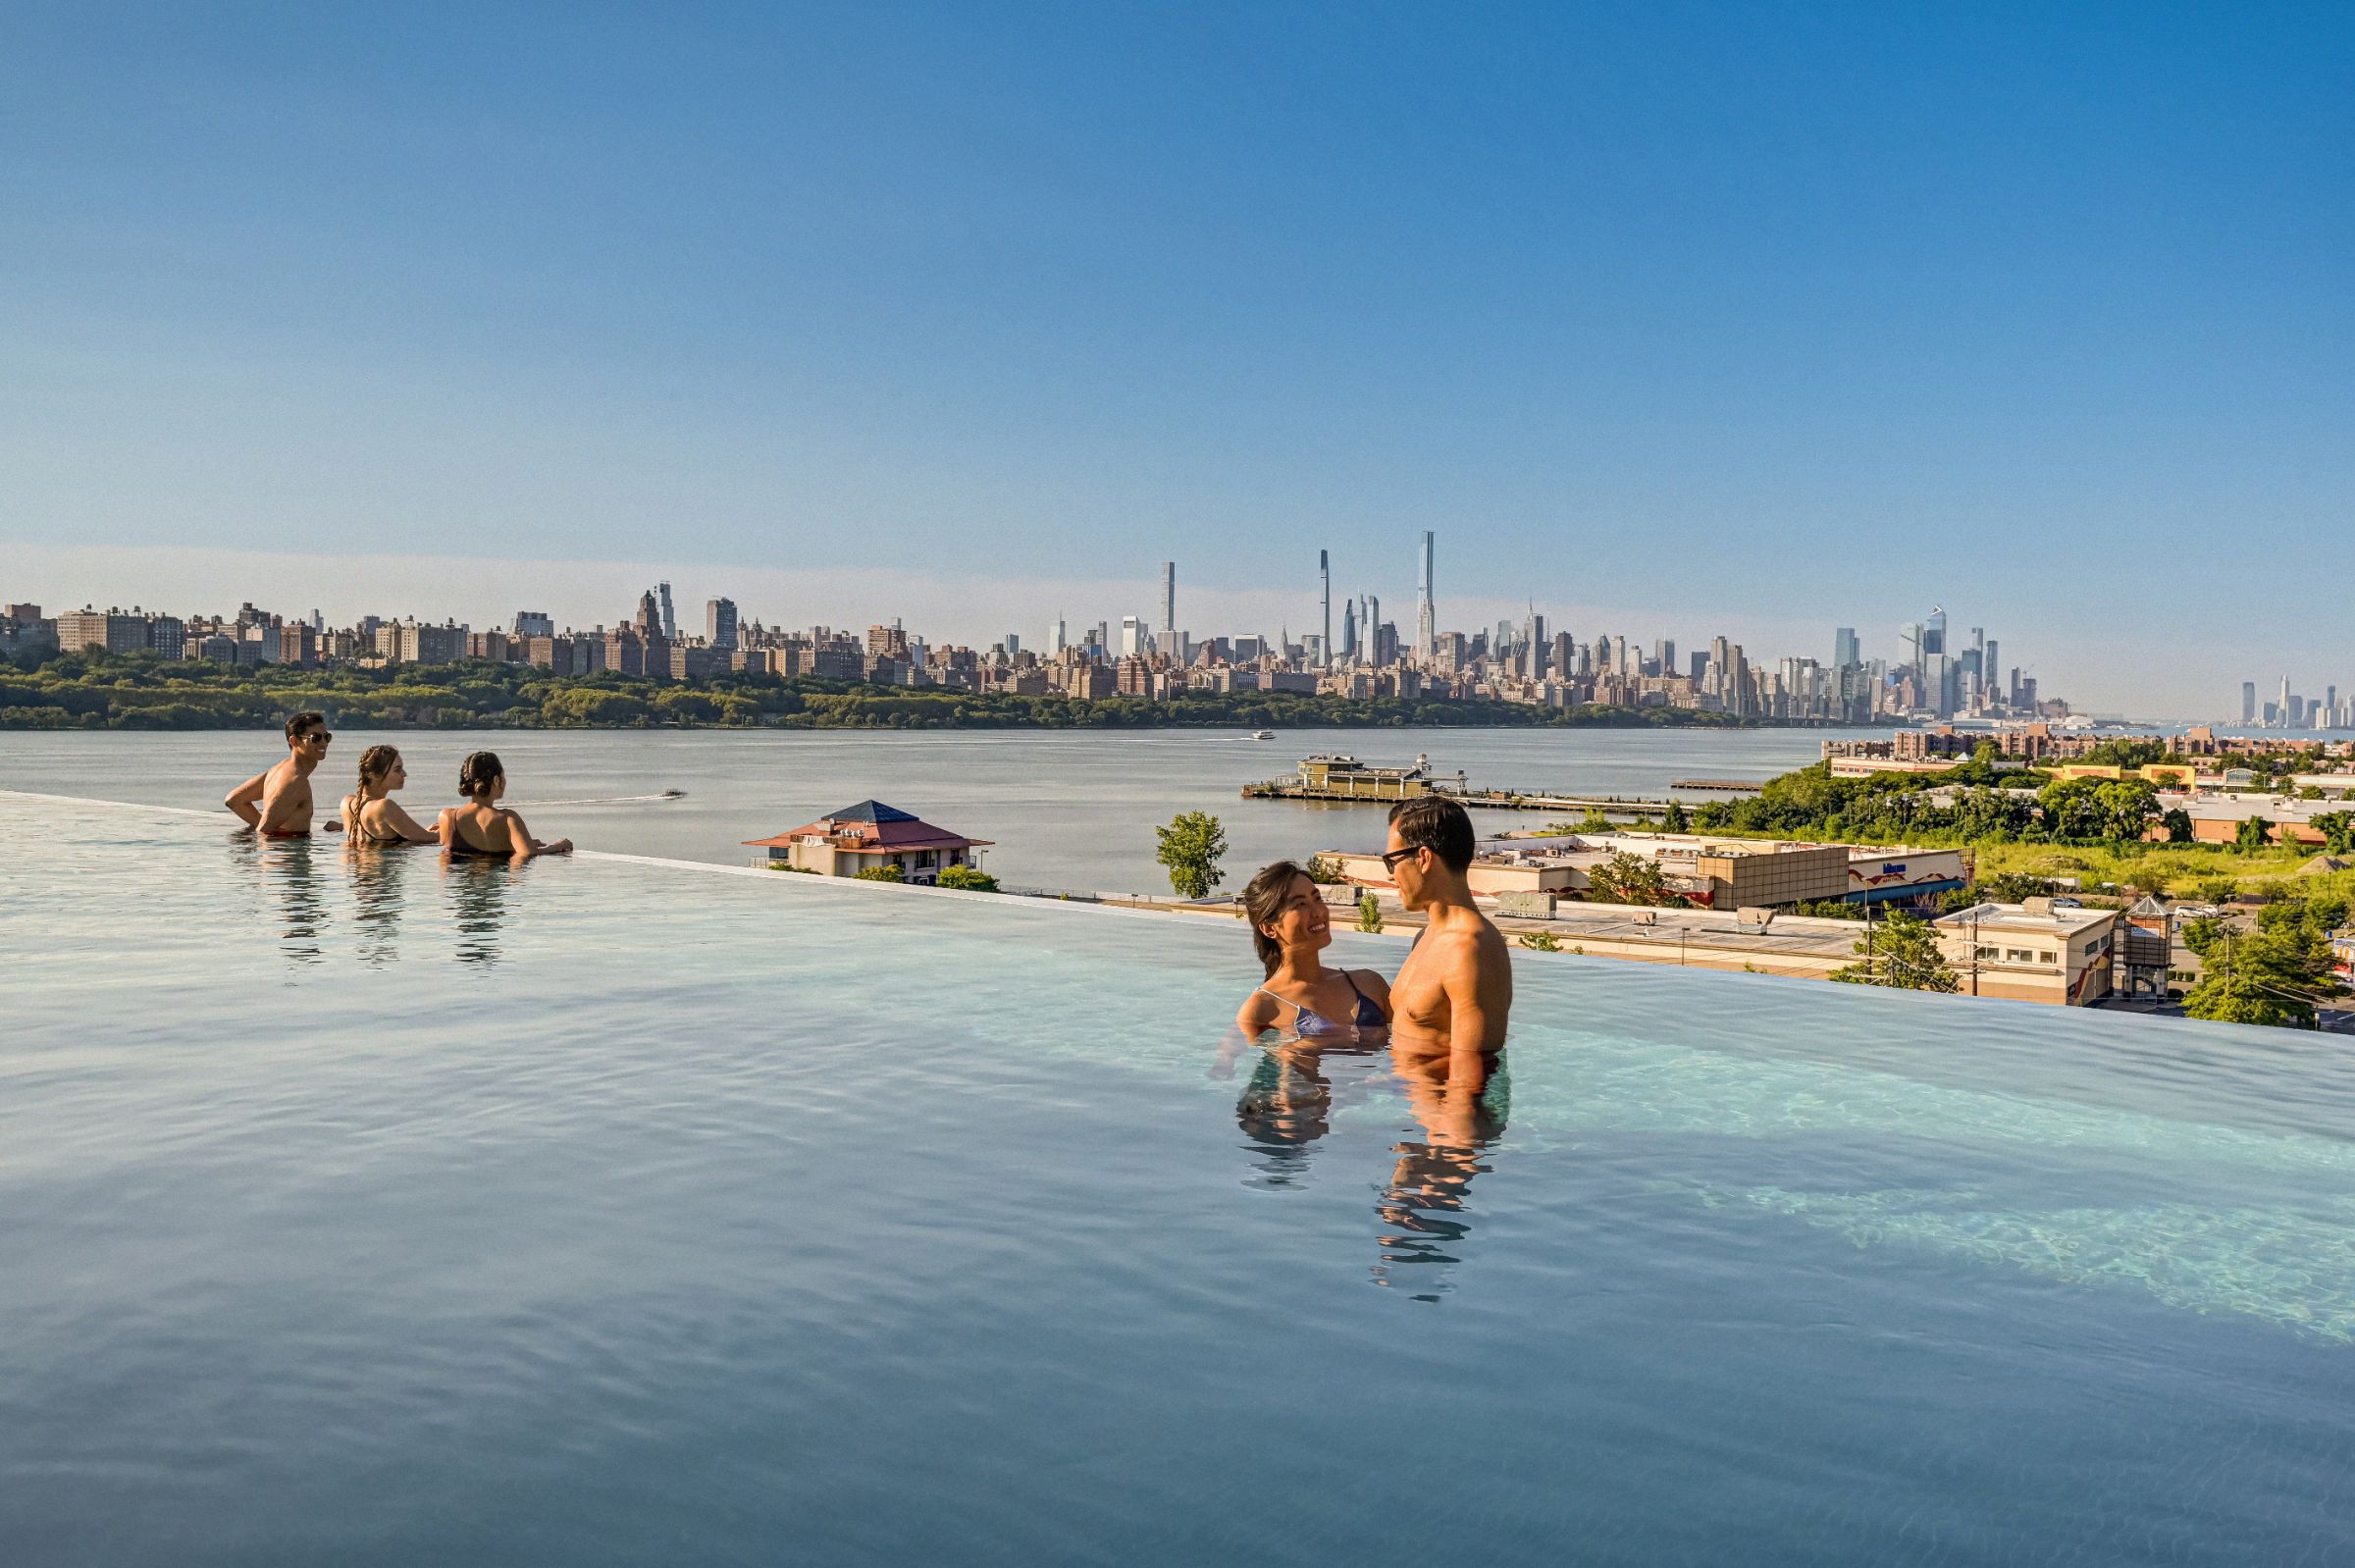 A smiling couple & 3 friends enjoy NYC skyline from SoJo spa club's rooftop infinity pool on a bright, sunny day